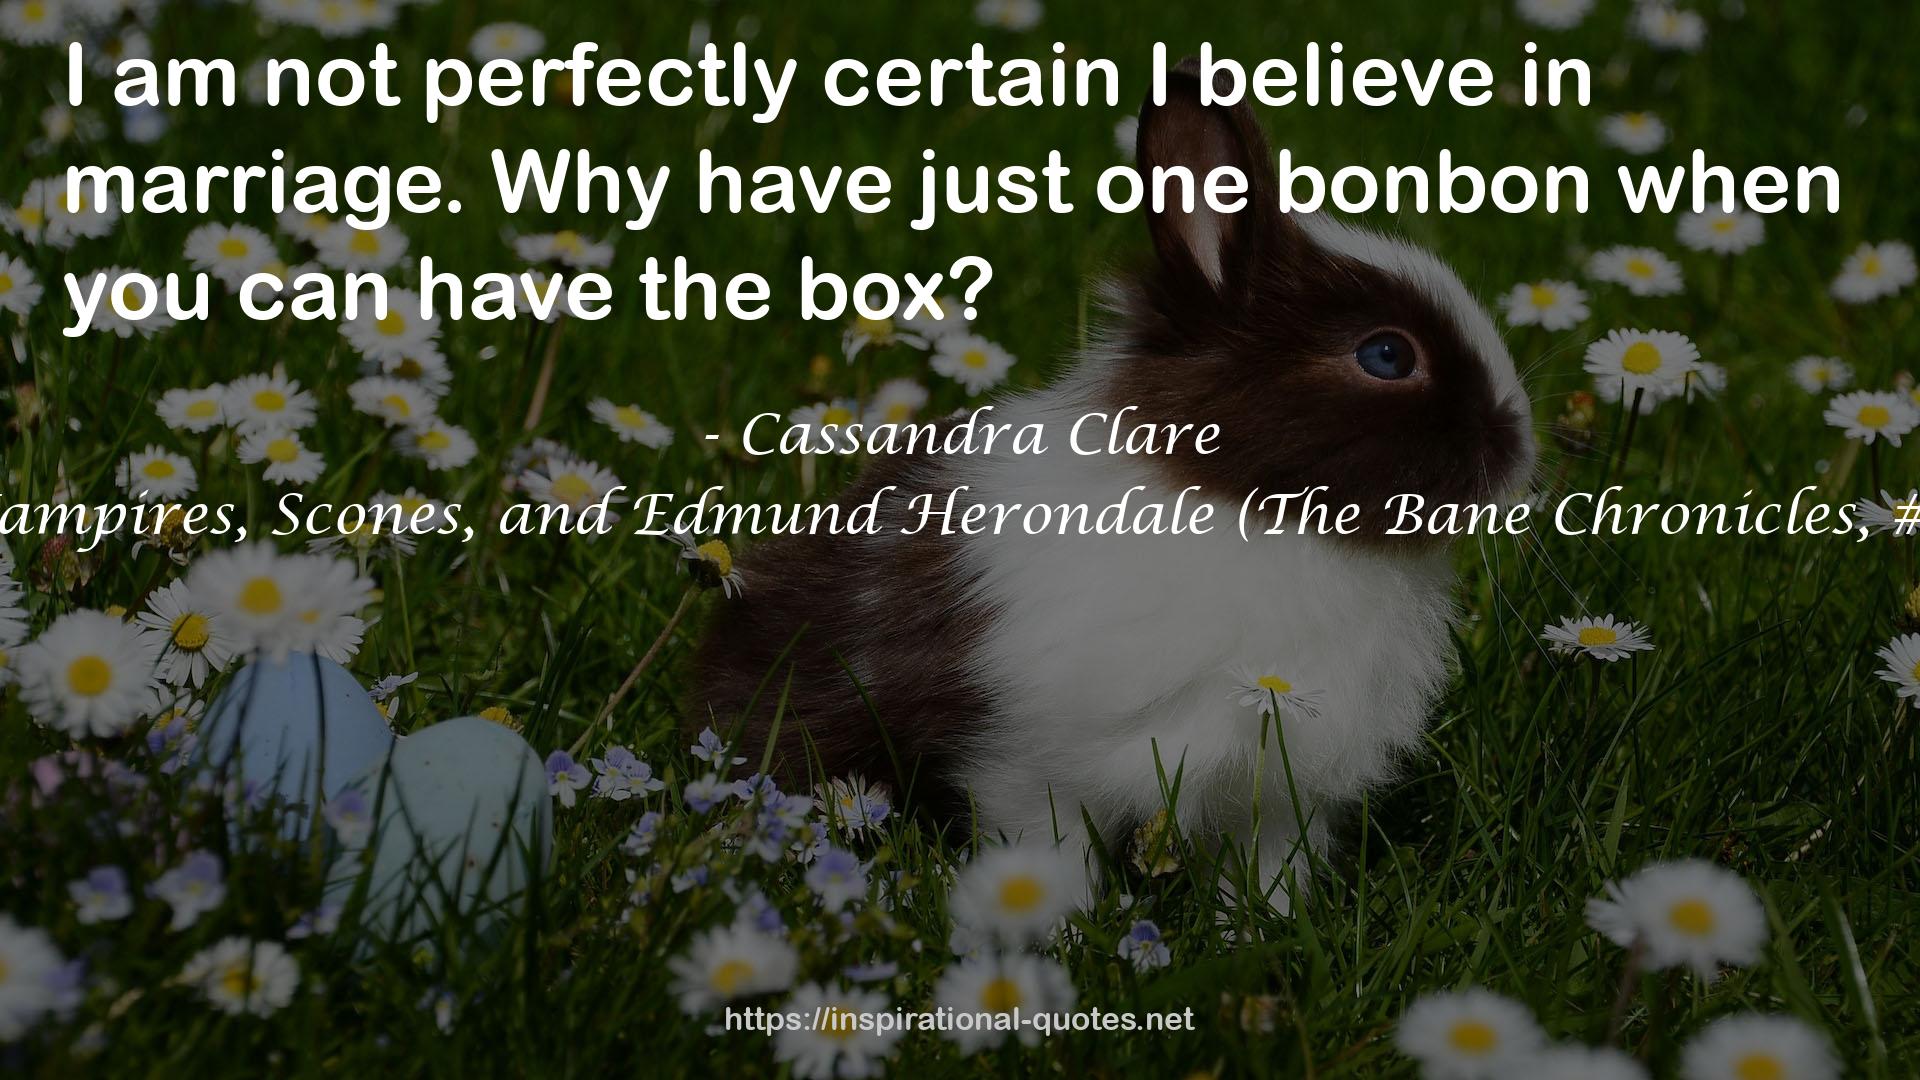 Vampires, Scones, and Edmund Herondale (The Bane Chronicles, #3) QUOTES